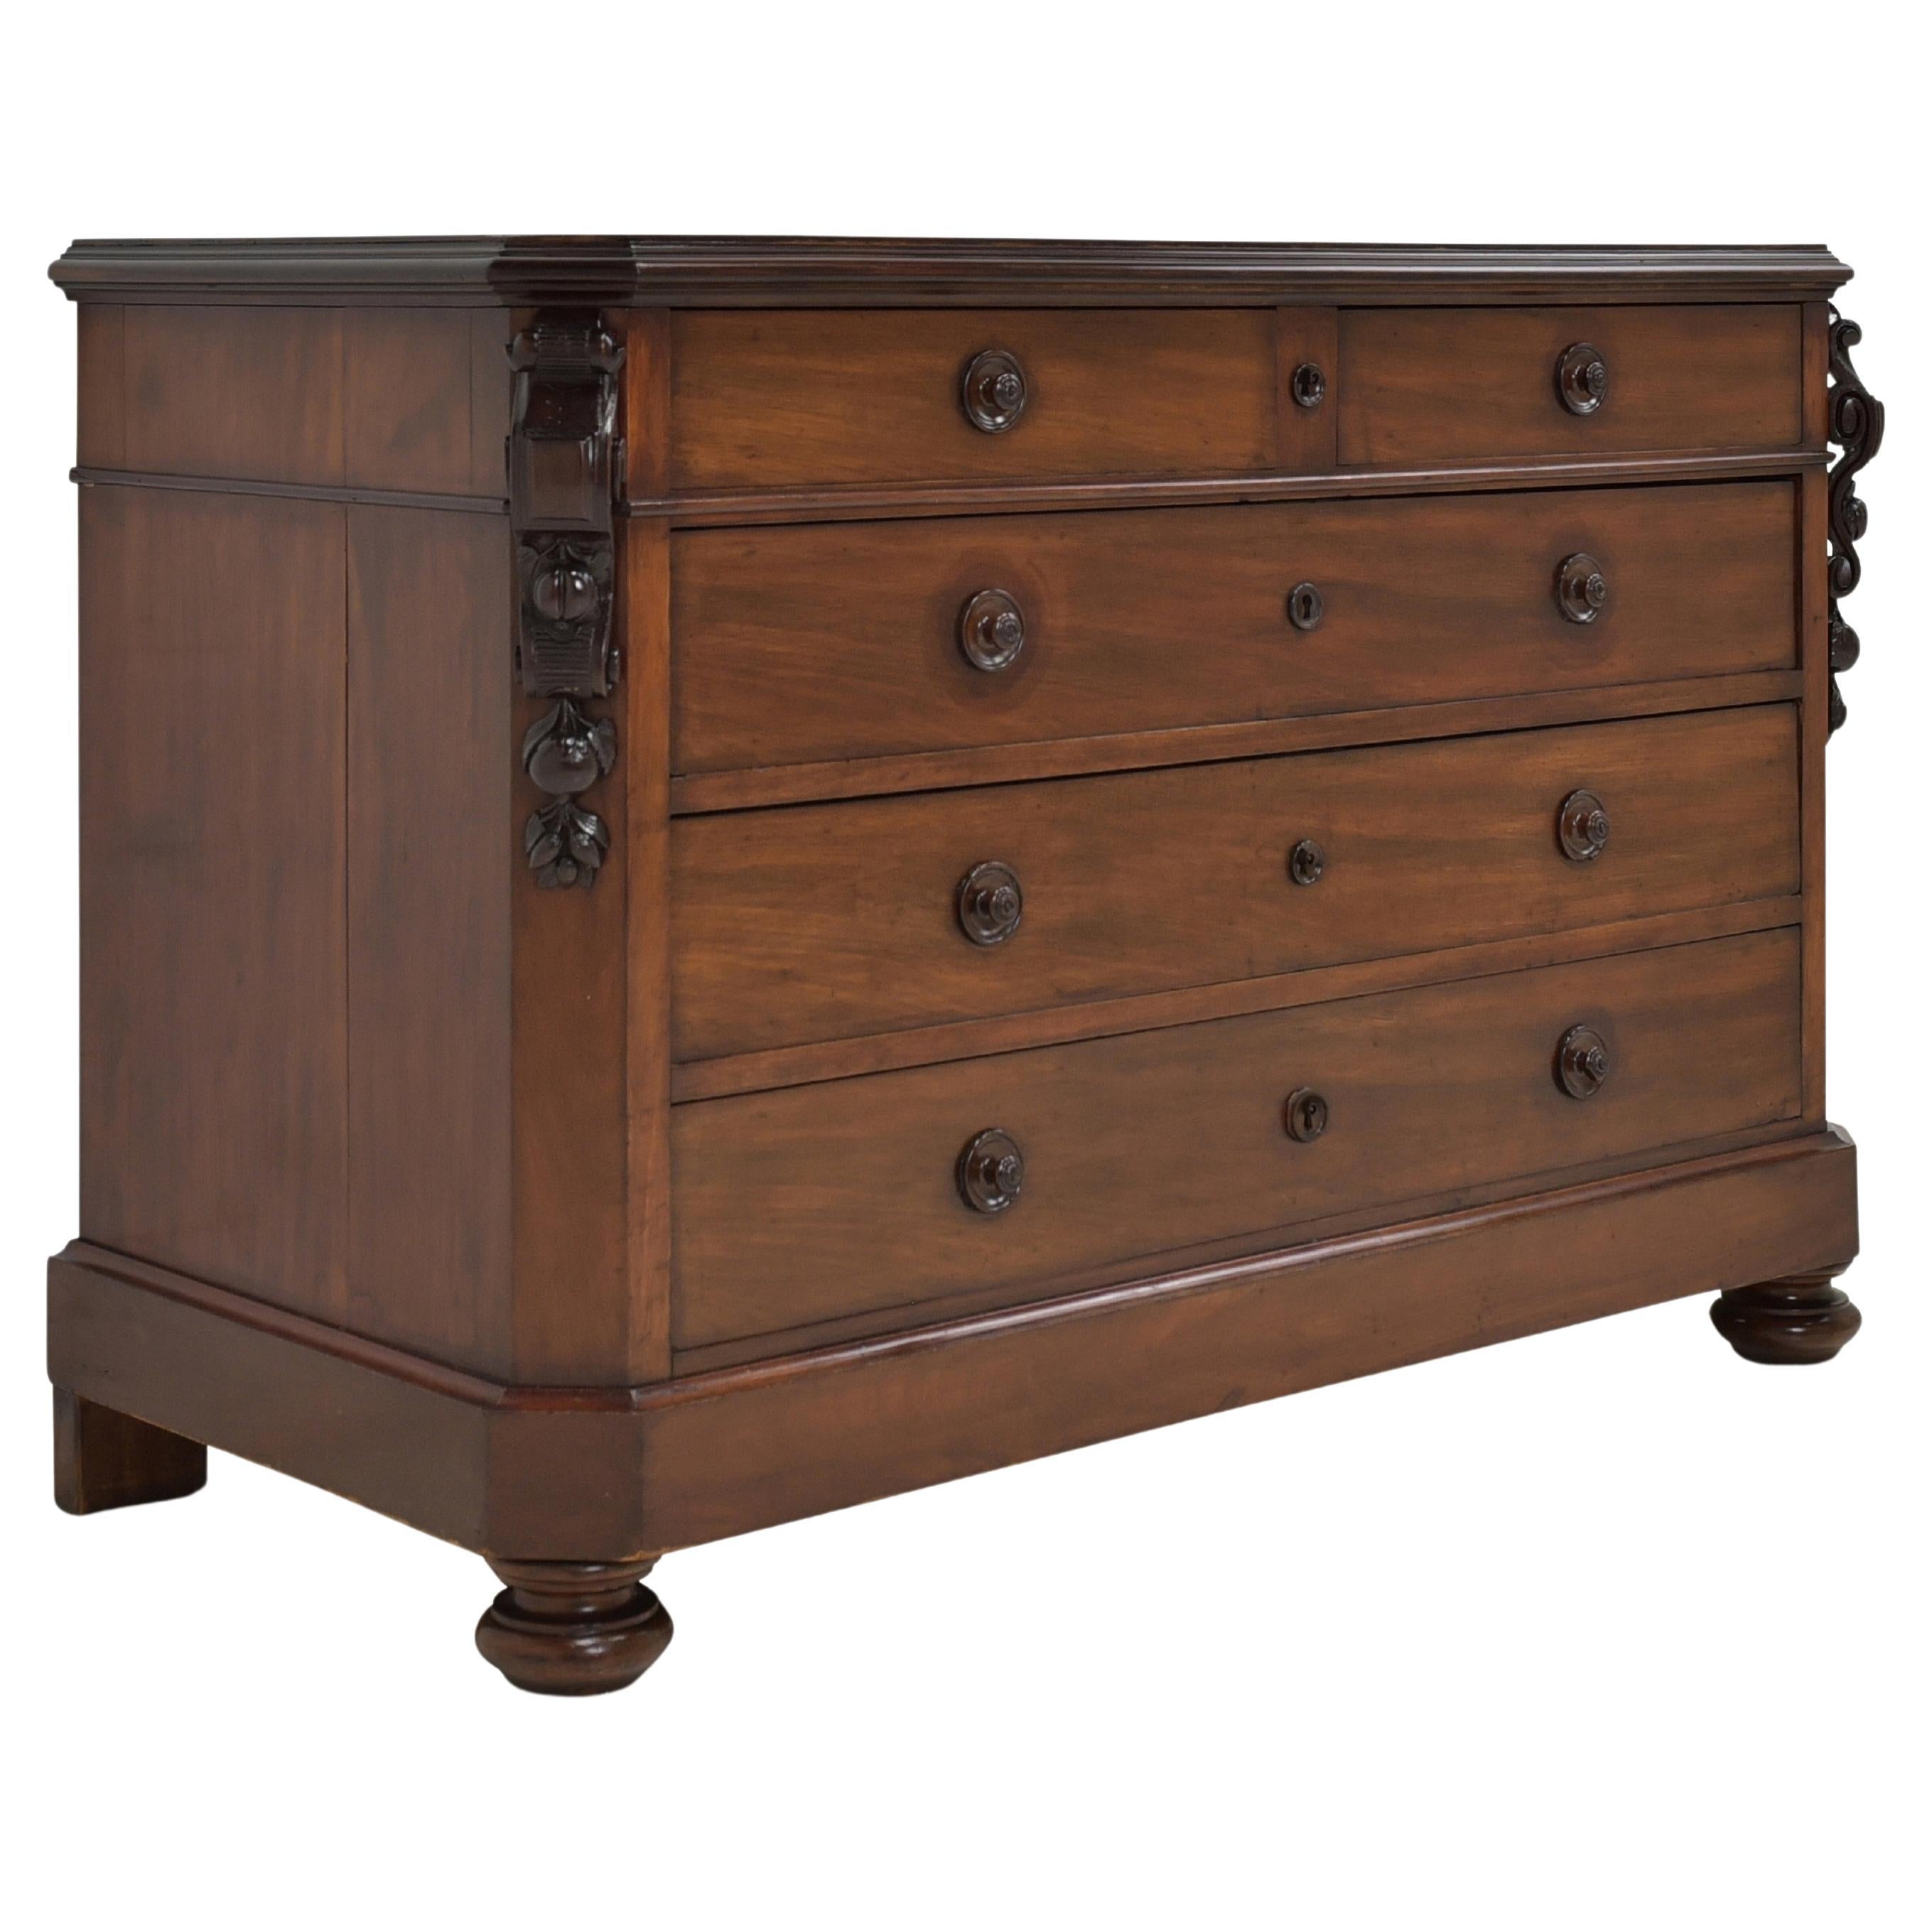 Mahogany Louis Philippe Drawer Chest from 1870